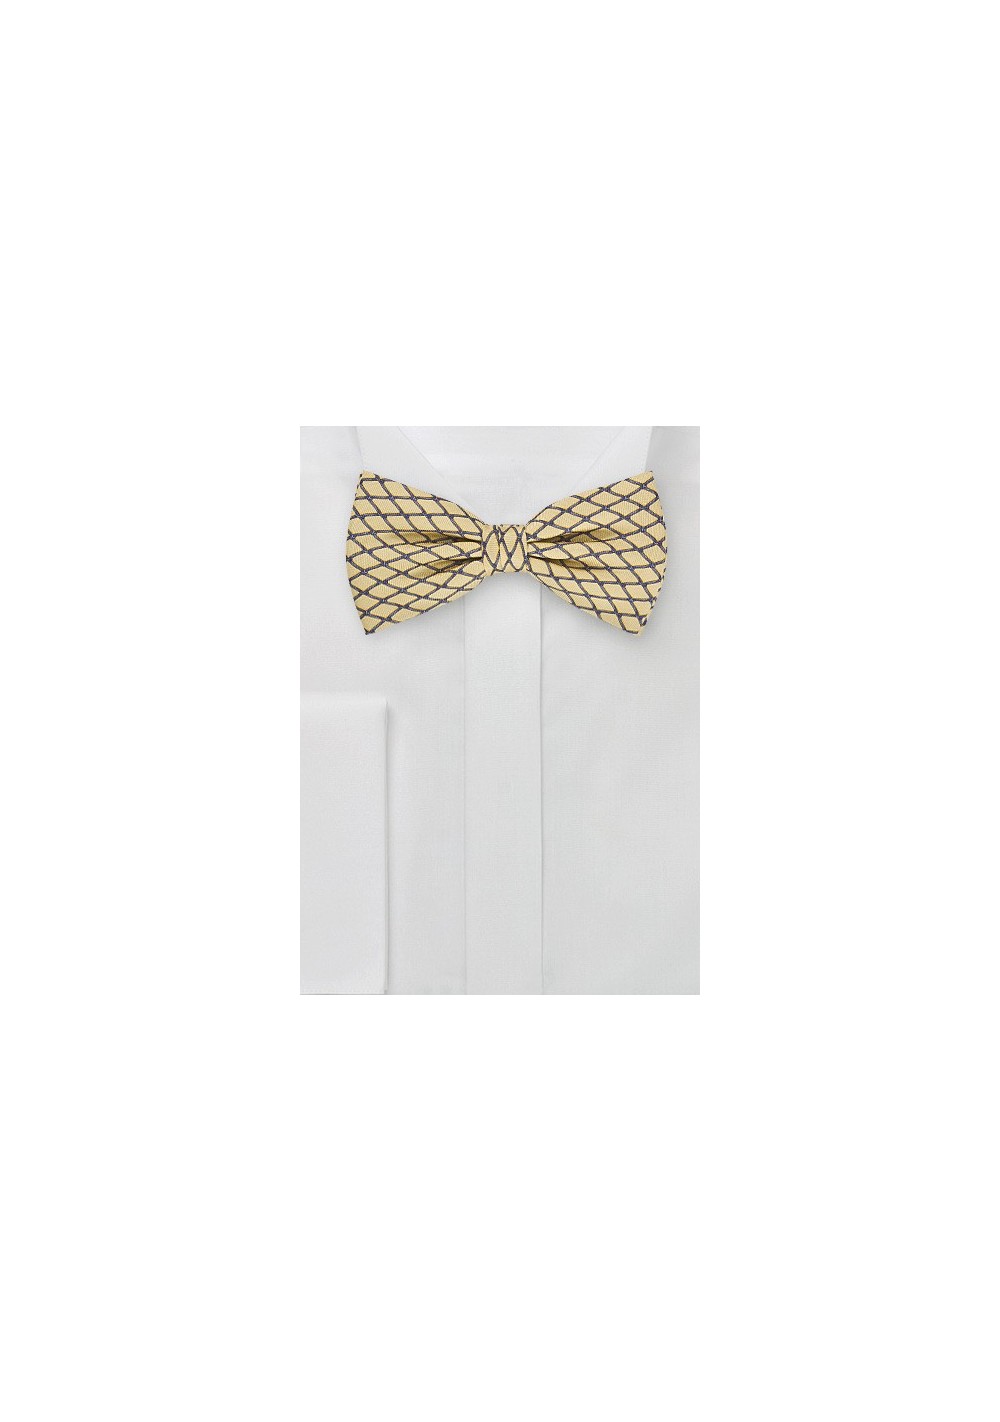 Modern Bow Tie in Maize Yellow